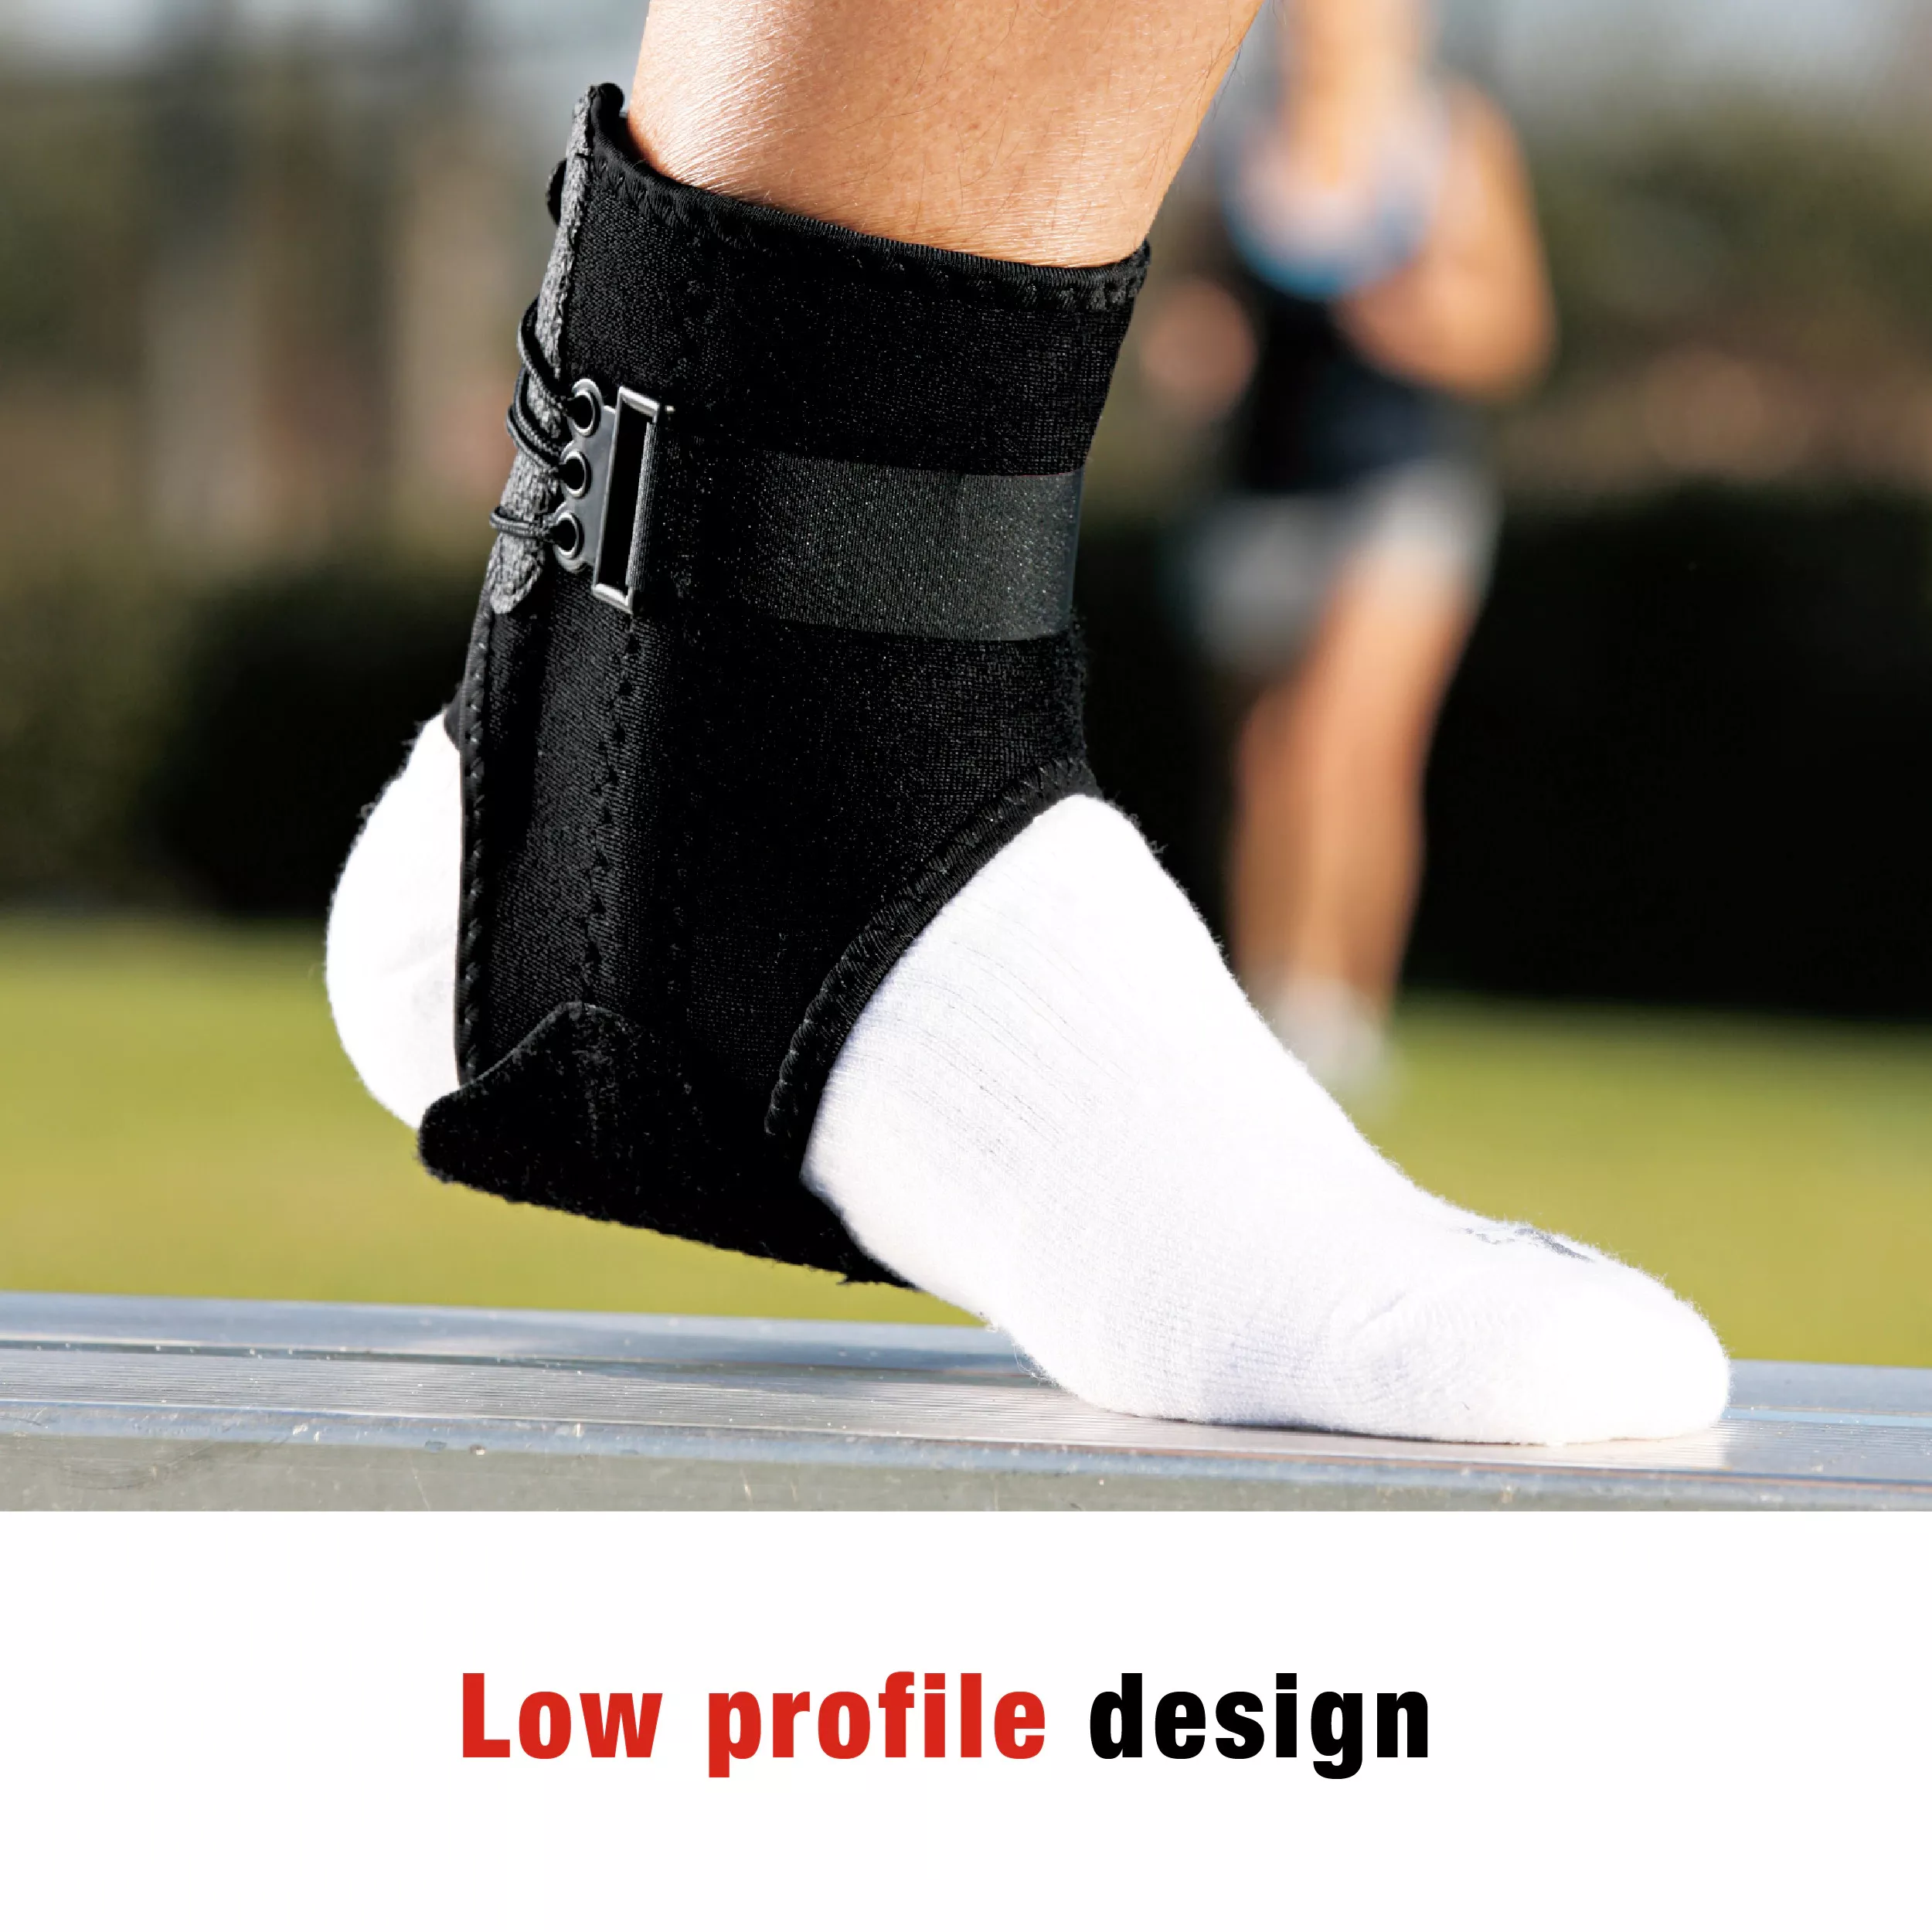 SKU 7010378920 | ACE™ Ankle Brace with Side Stabilizers 207266